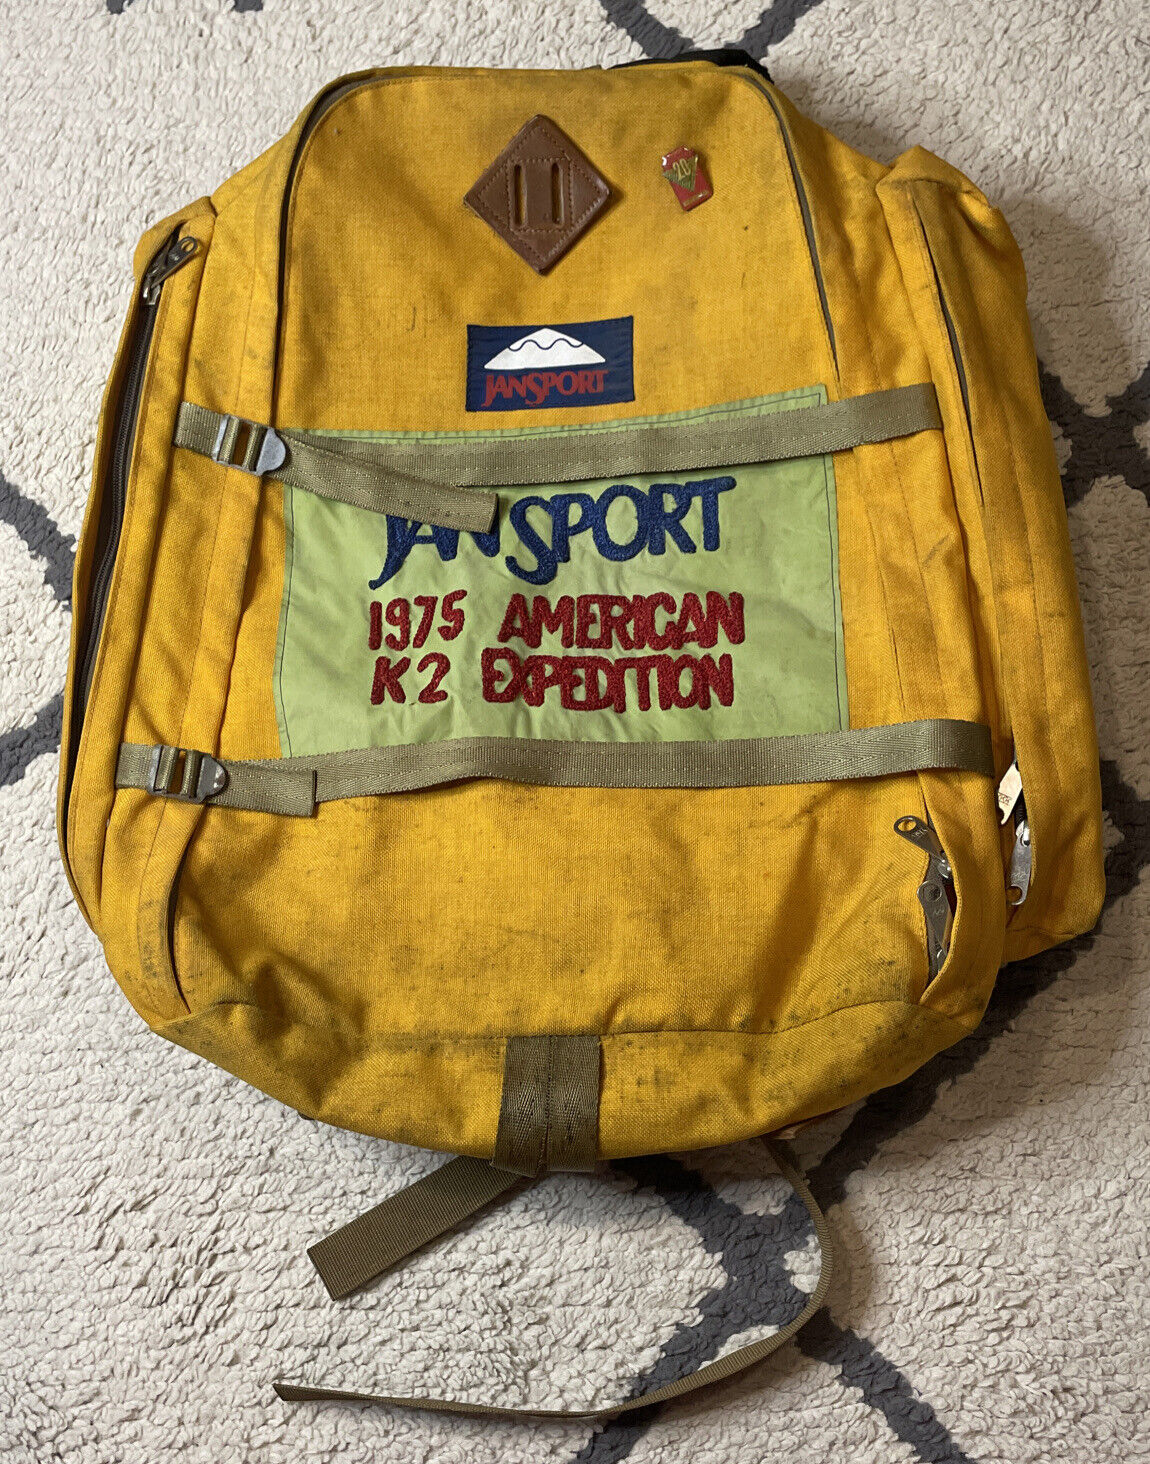 RARE 1975 American K2 Expdtn JanSport Backpack Skip Lowell Auto Mountaineering